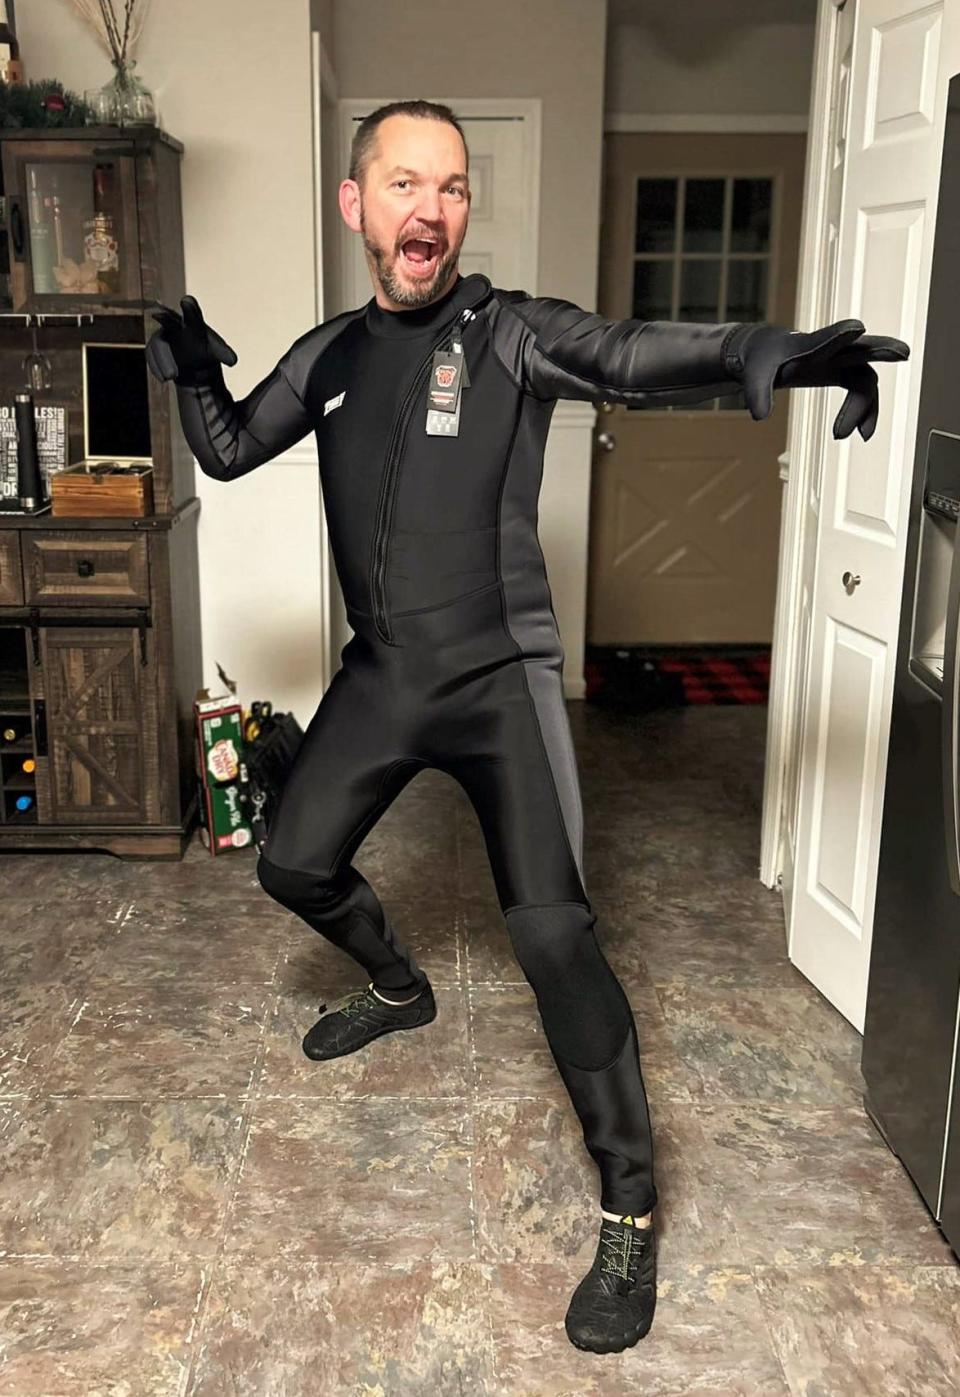 Dave Thomas, owner of Culver's of Adrian and a DDA/Main Street board member, is decked out in a wet suit and is all hyped up for today's "Maple Frost" First Fridays in downtown Adrian. February's edition of the promotional event features the new Maple Frost Plunge, in which Thomas and 11 other volunteers are fundraising for various Lenawee County organizations. If each participant raises more than $500 they will take a polar plunge into an icy, cold pool of water right in the heart of downtown Adrian. Thomas is raising funds for the Lenawee County Education Foundation.